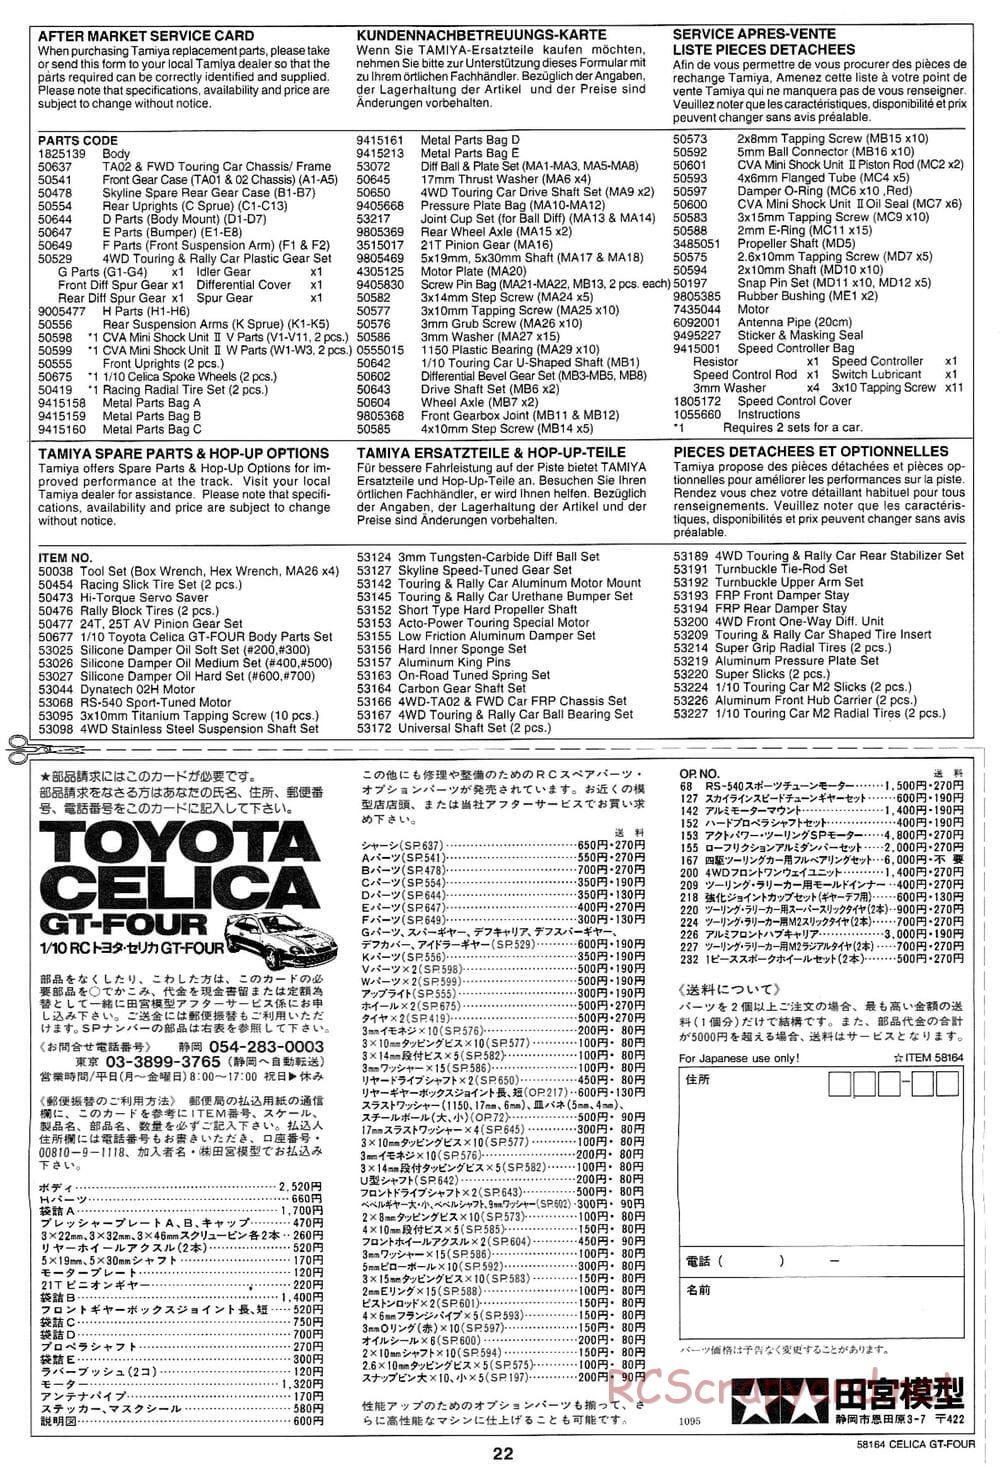 Tamiya - Toyota Celica GT Four - TA-02 Chassis - Manual - Page 23